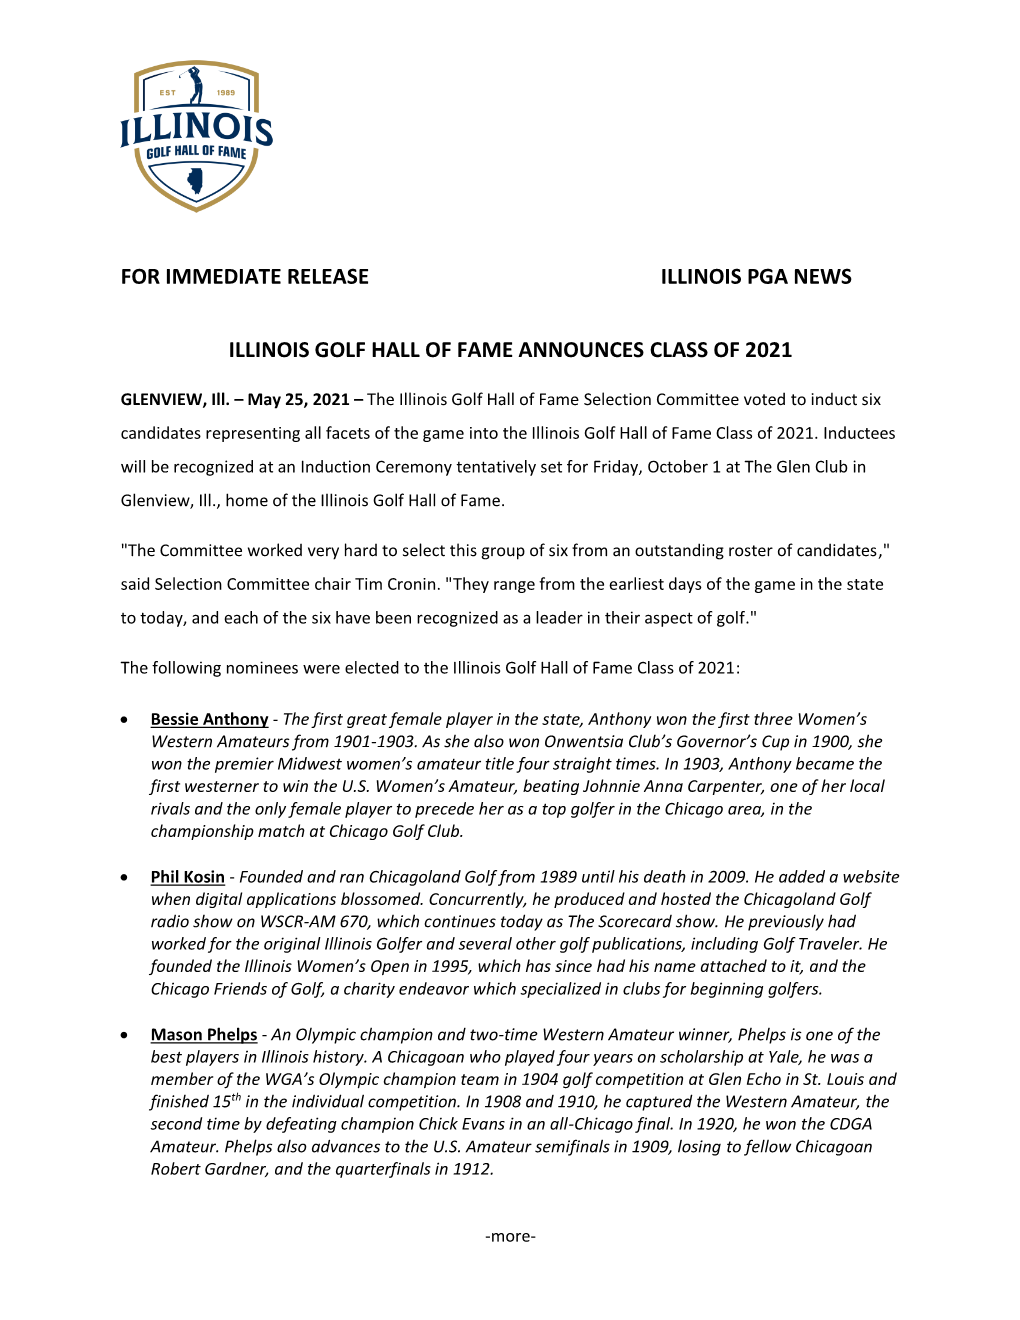 For Immediate Release Illinois Pga News Illinois Golf Hall of Fame Announces Class of 2021